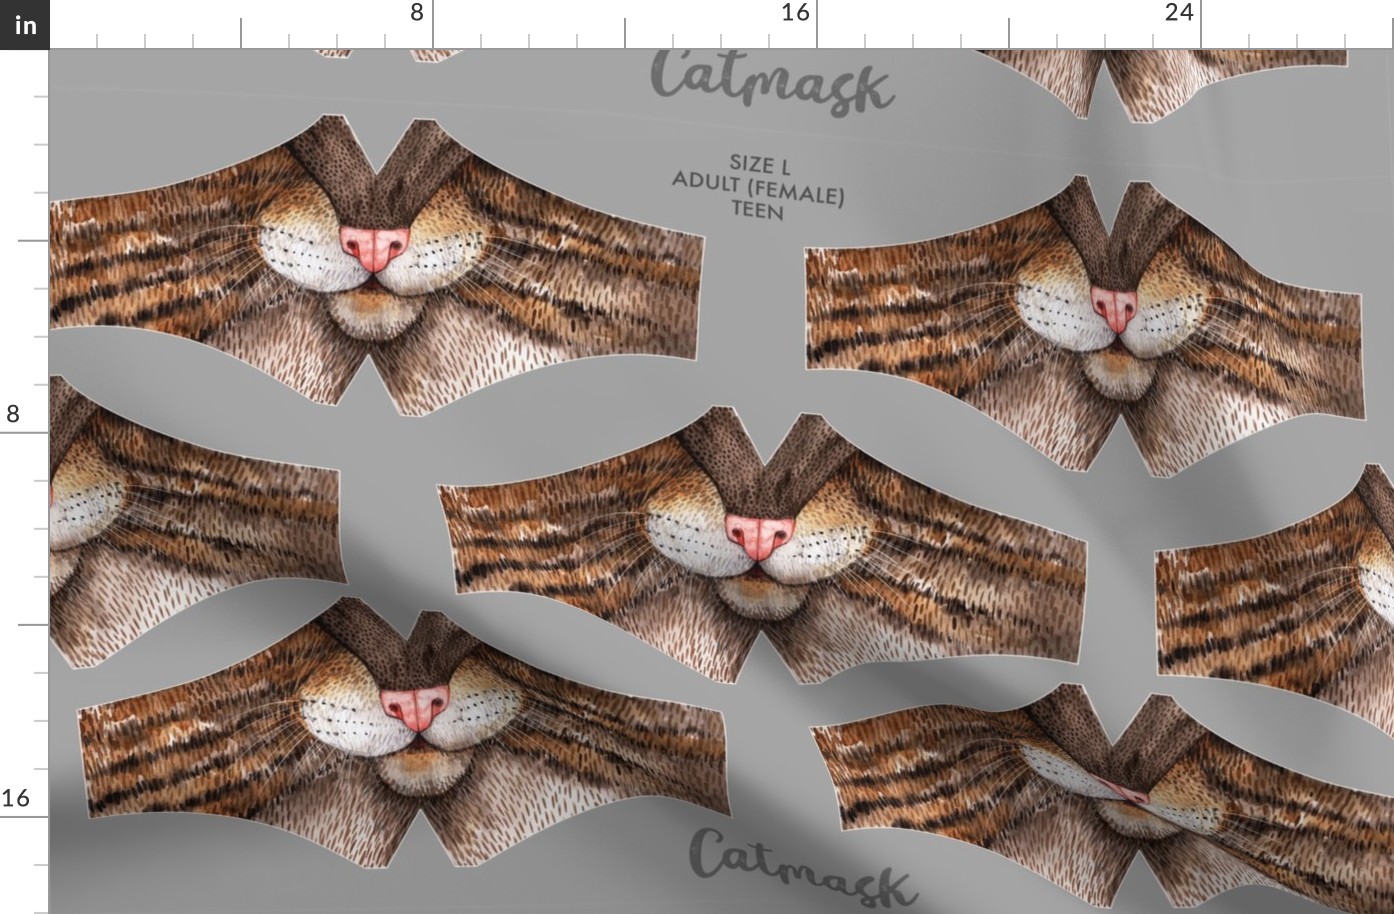 Catmask Size L - Adult (female) and Teens - cat face mask